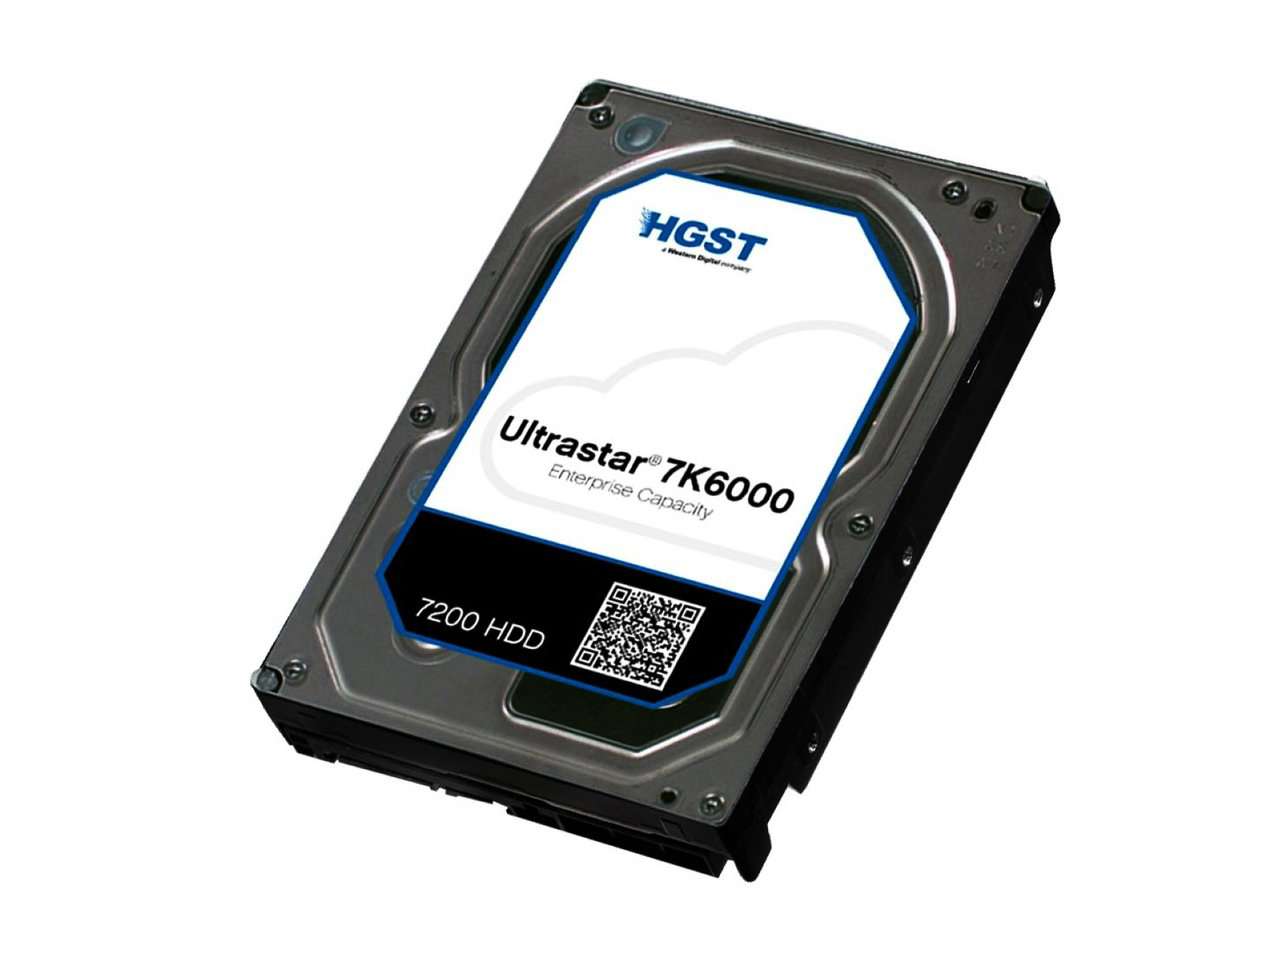 HGST Ultrastar 7K6000 0F22790  HUS726060AL4210 6TB 7.2K RPM SAS 12Gb/s 4Kn 128MB Cache 3.5" ISE Hard Disk Drive